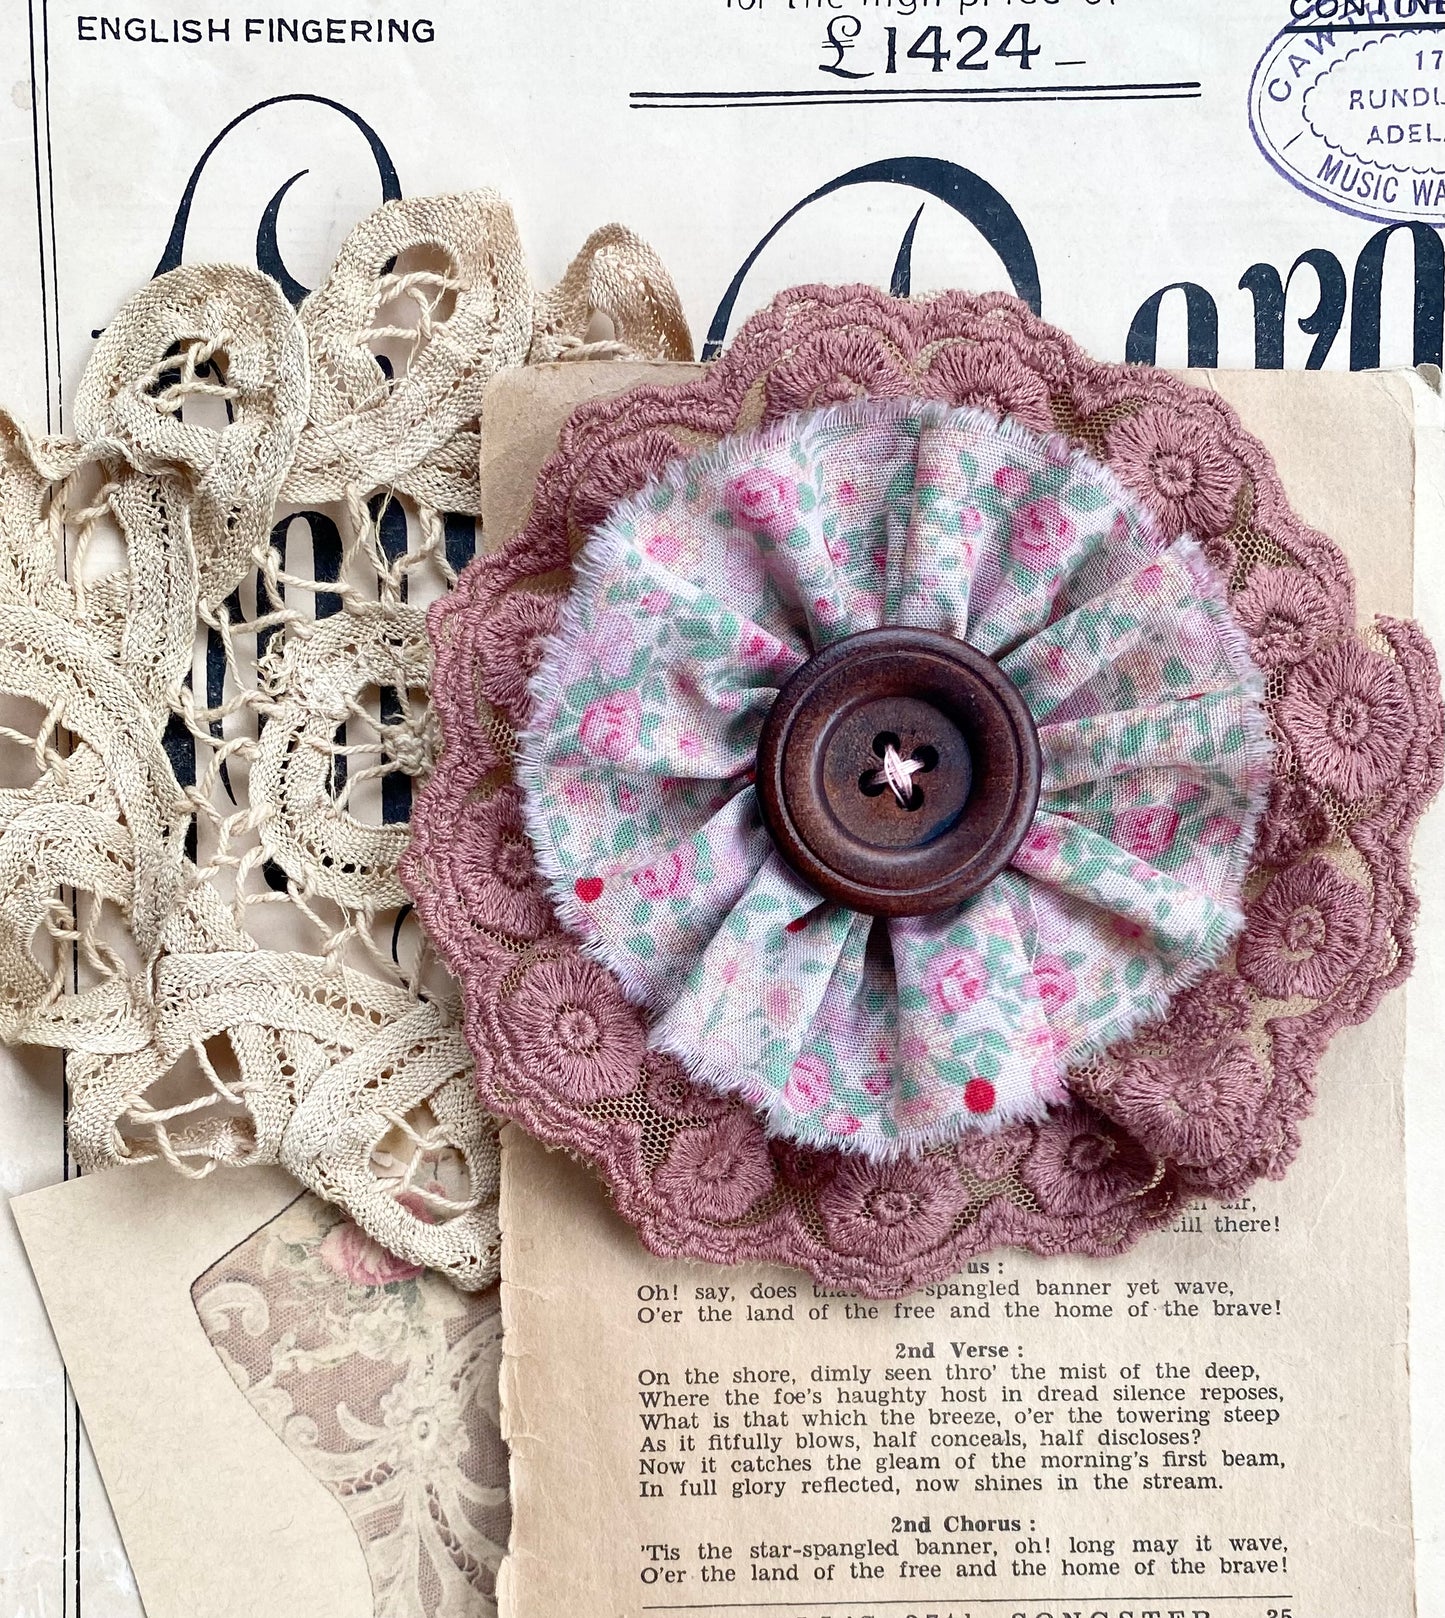 Vintage floral and lace brooch.